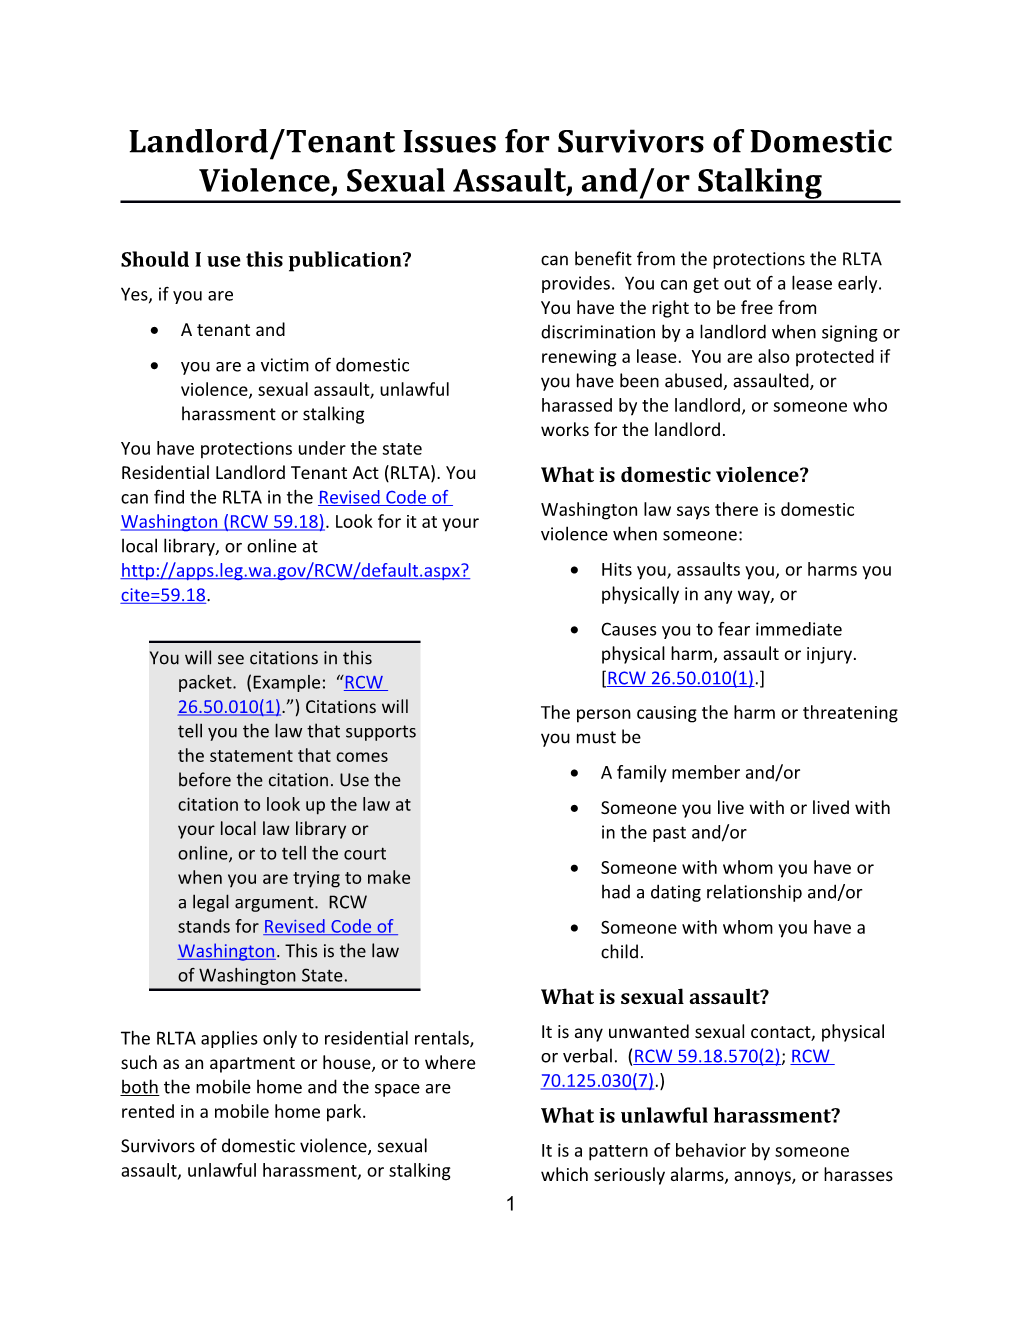 Landlord/Tenant Issues for Survivors of Domestic Violence, Sexual Assault, And/Or Stalking